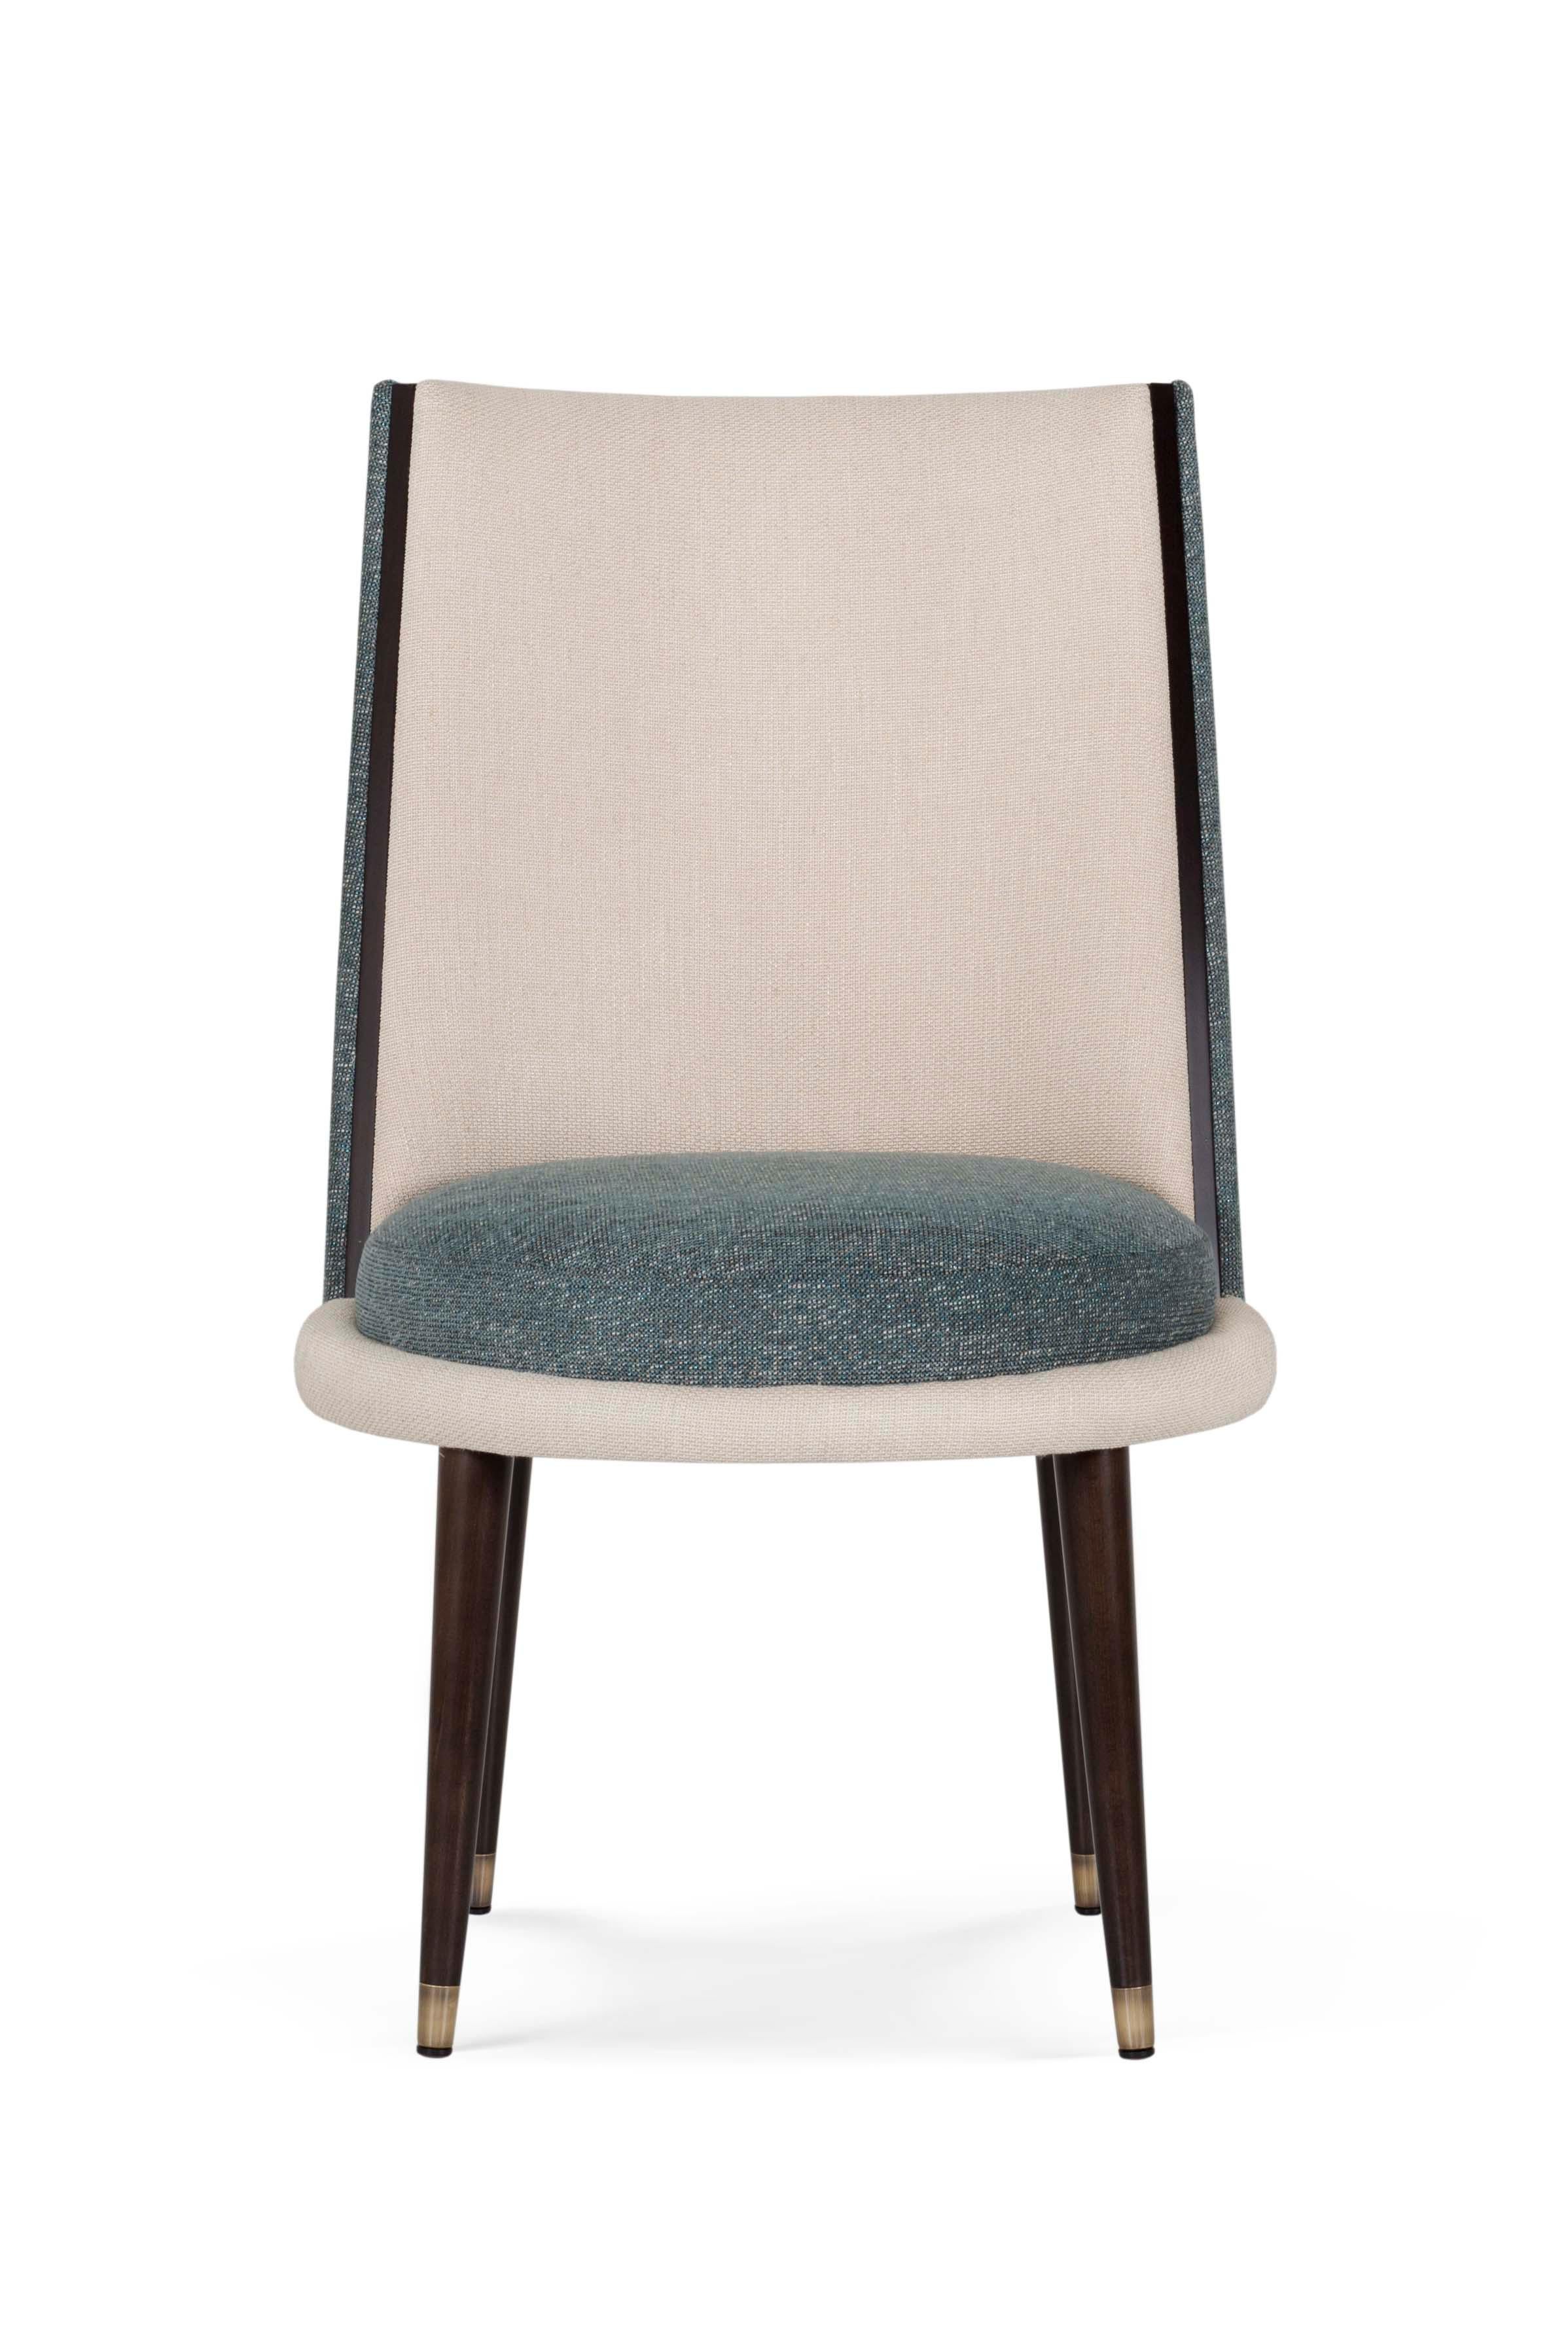 Portuguese Modern De Castro Dining Chair, Blue Beige Woven, Handmade Portugal by Greenapple For Sale